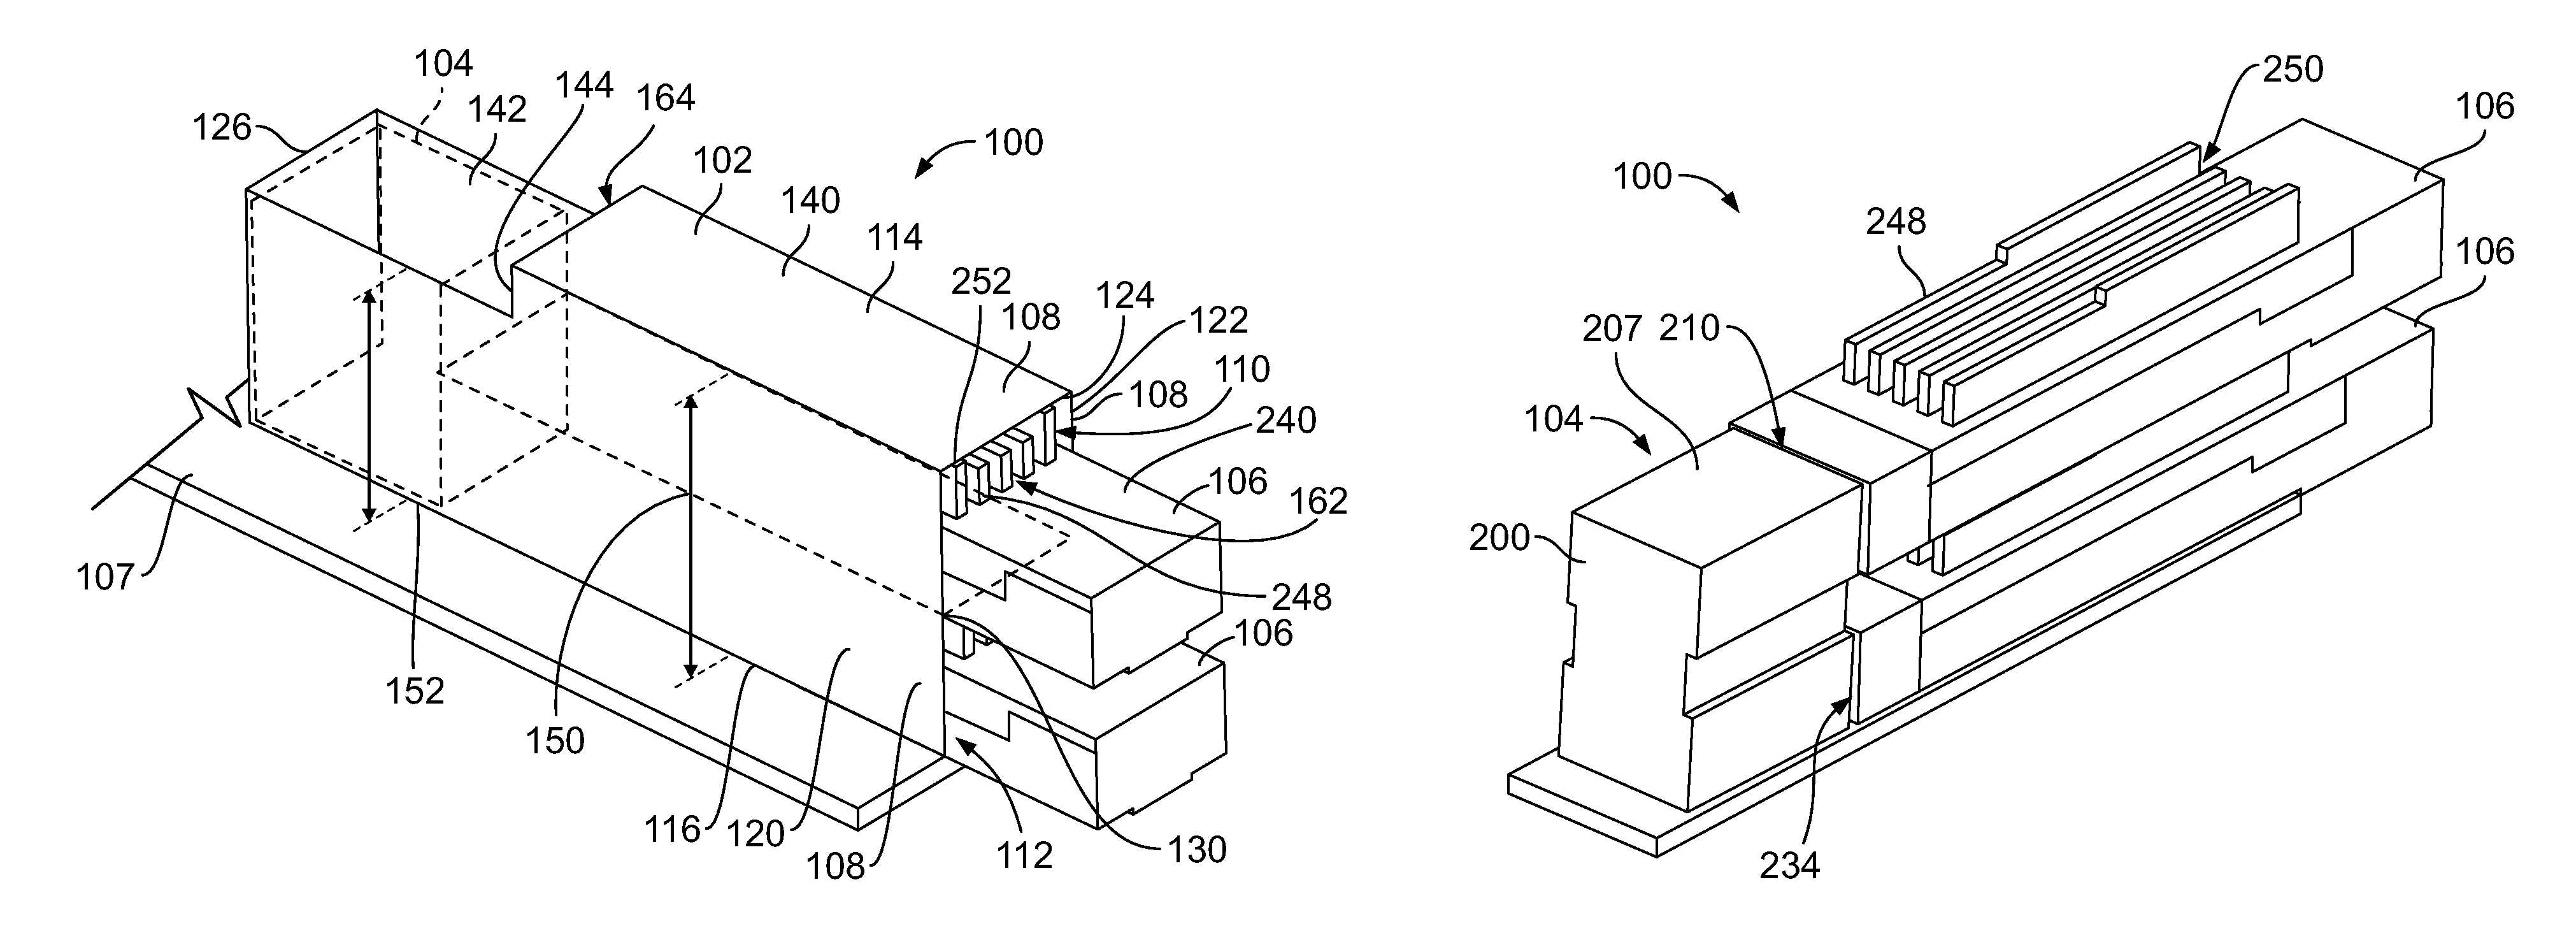 Electrical connector assembly having stepped surface